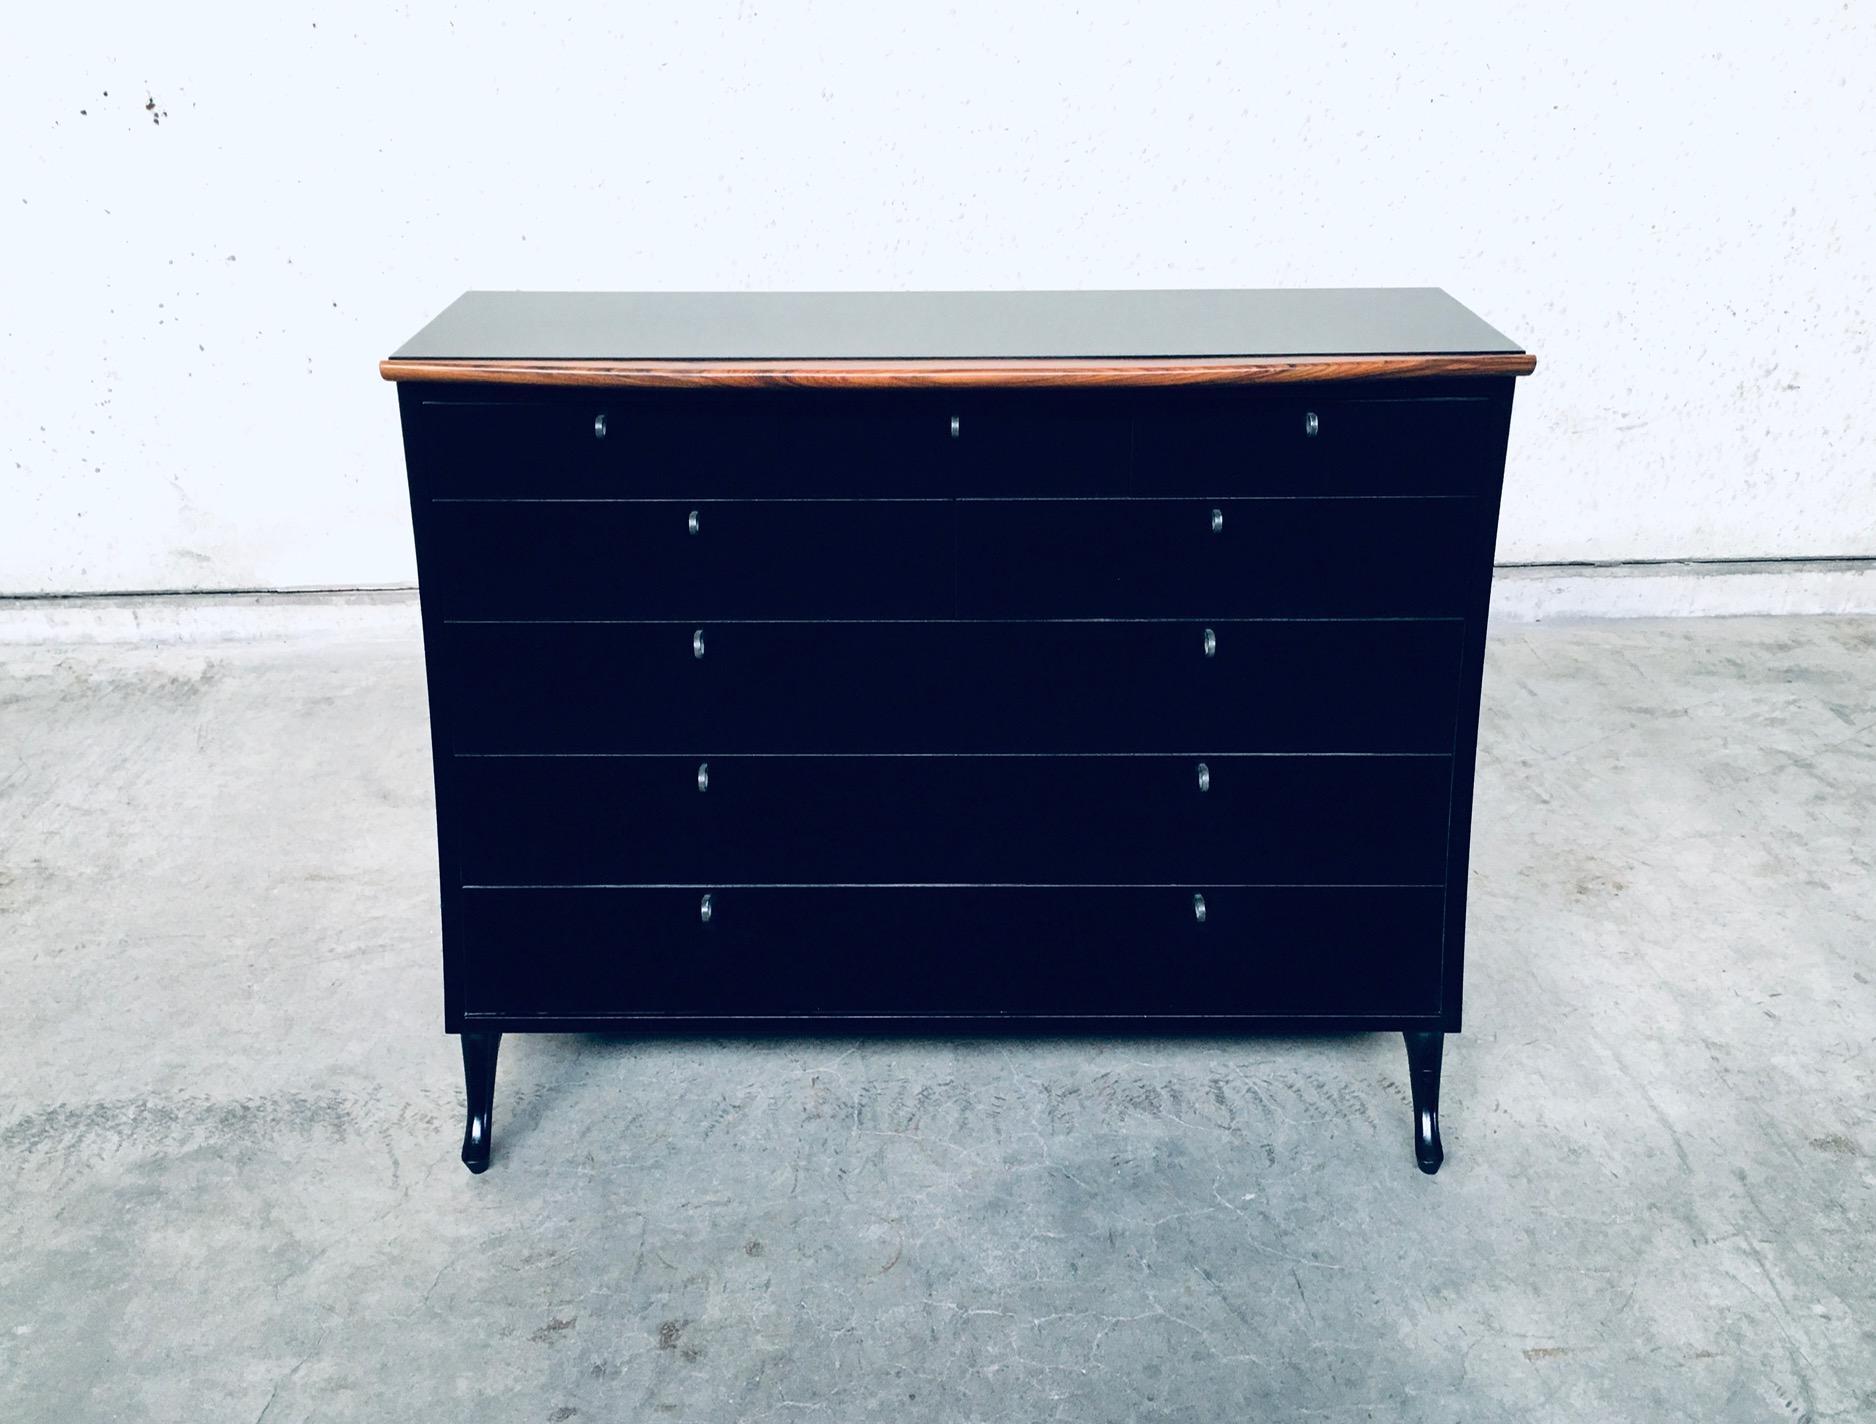 Post-Modern Postmodern Design Chest of Drawers by Umberto Asnago for Giorgetti, Italy 1980's For Sale